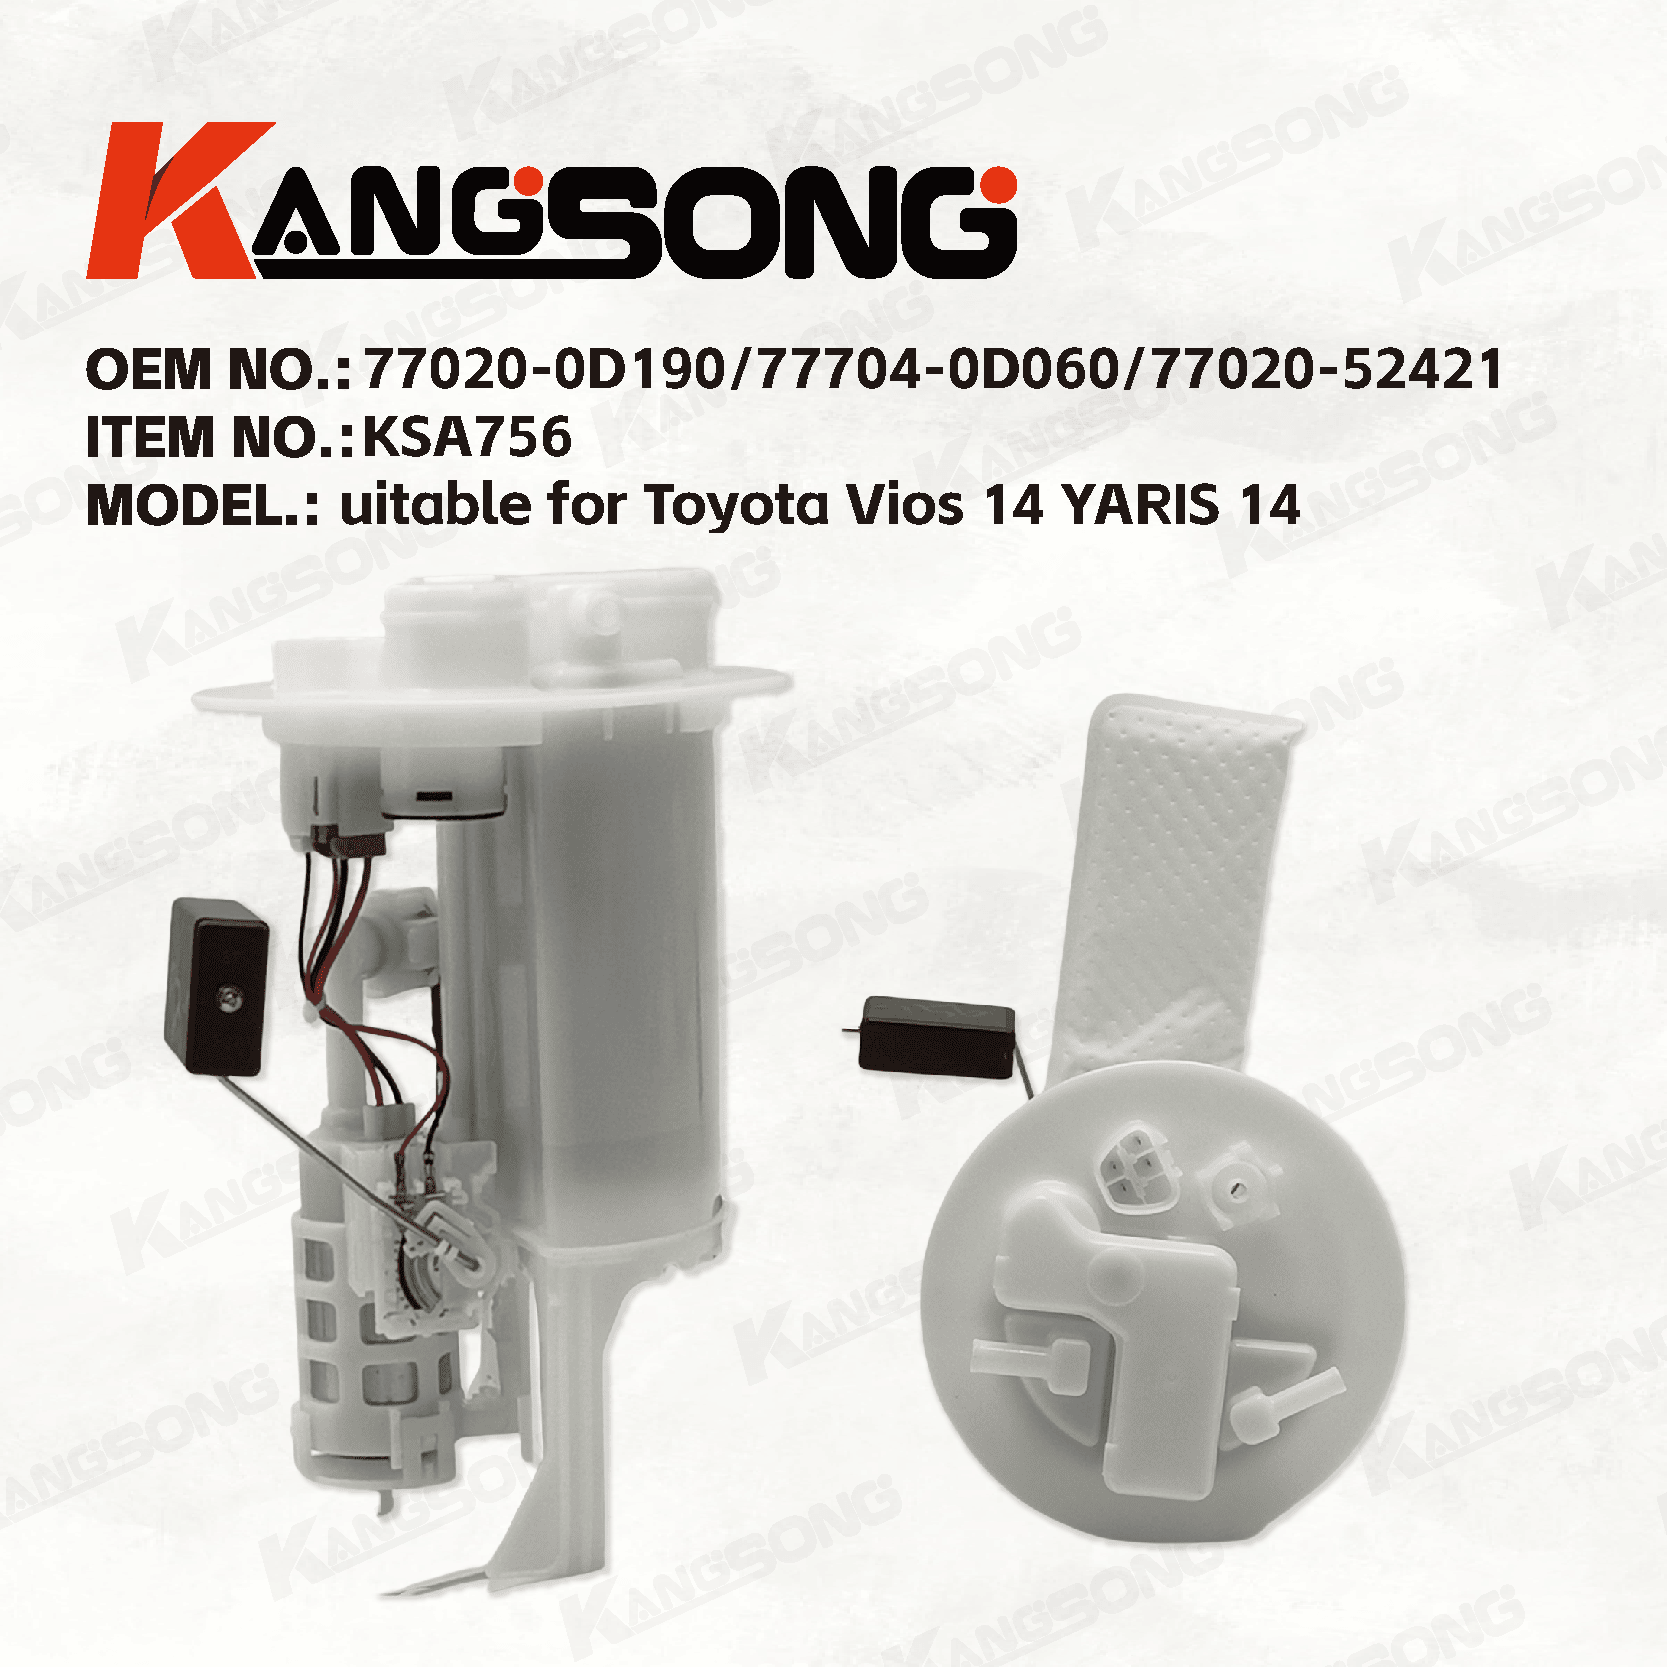 Applicable to Toyota Vios 14 YARIS 14/77020-0D190 77704-0D060 77020-52421/Fuel Pump Assembly/ KS-A756